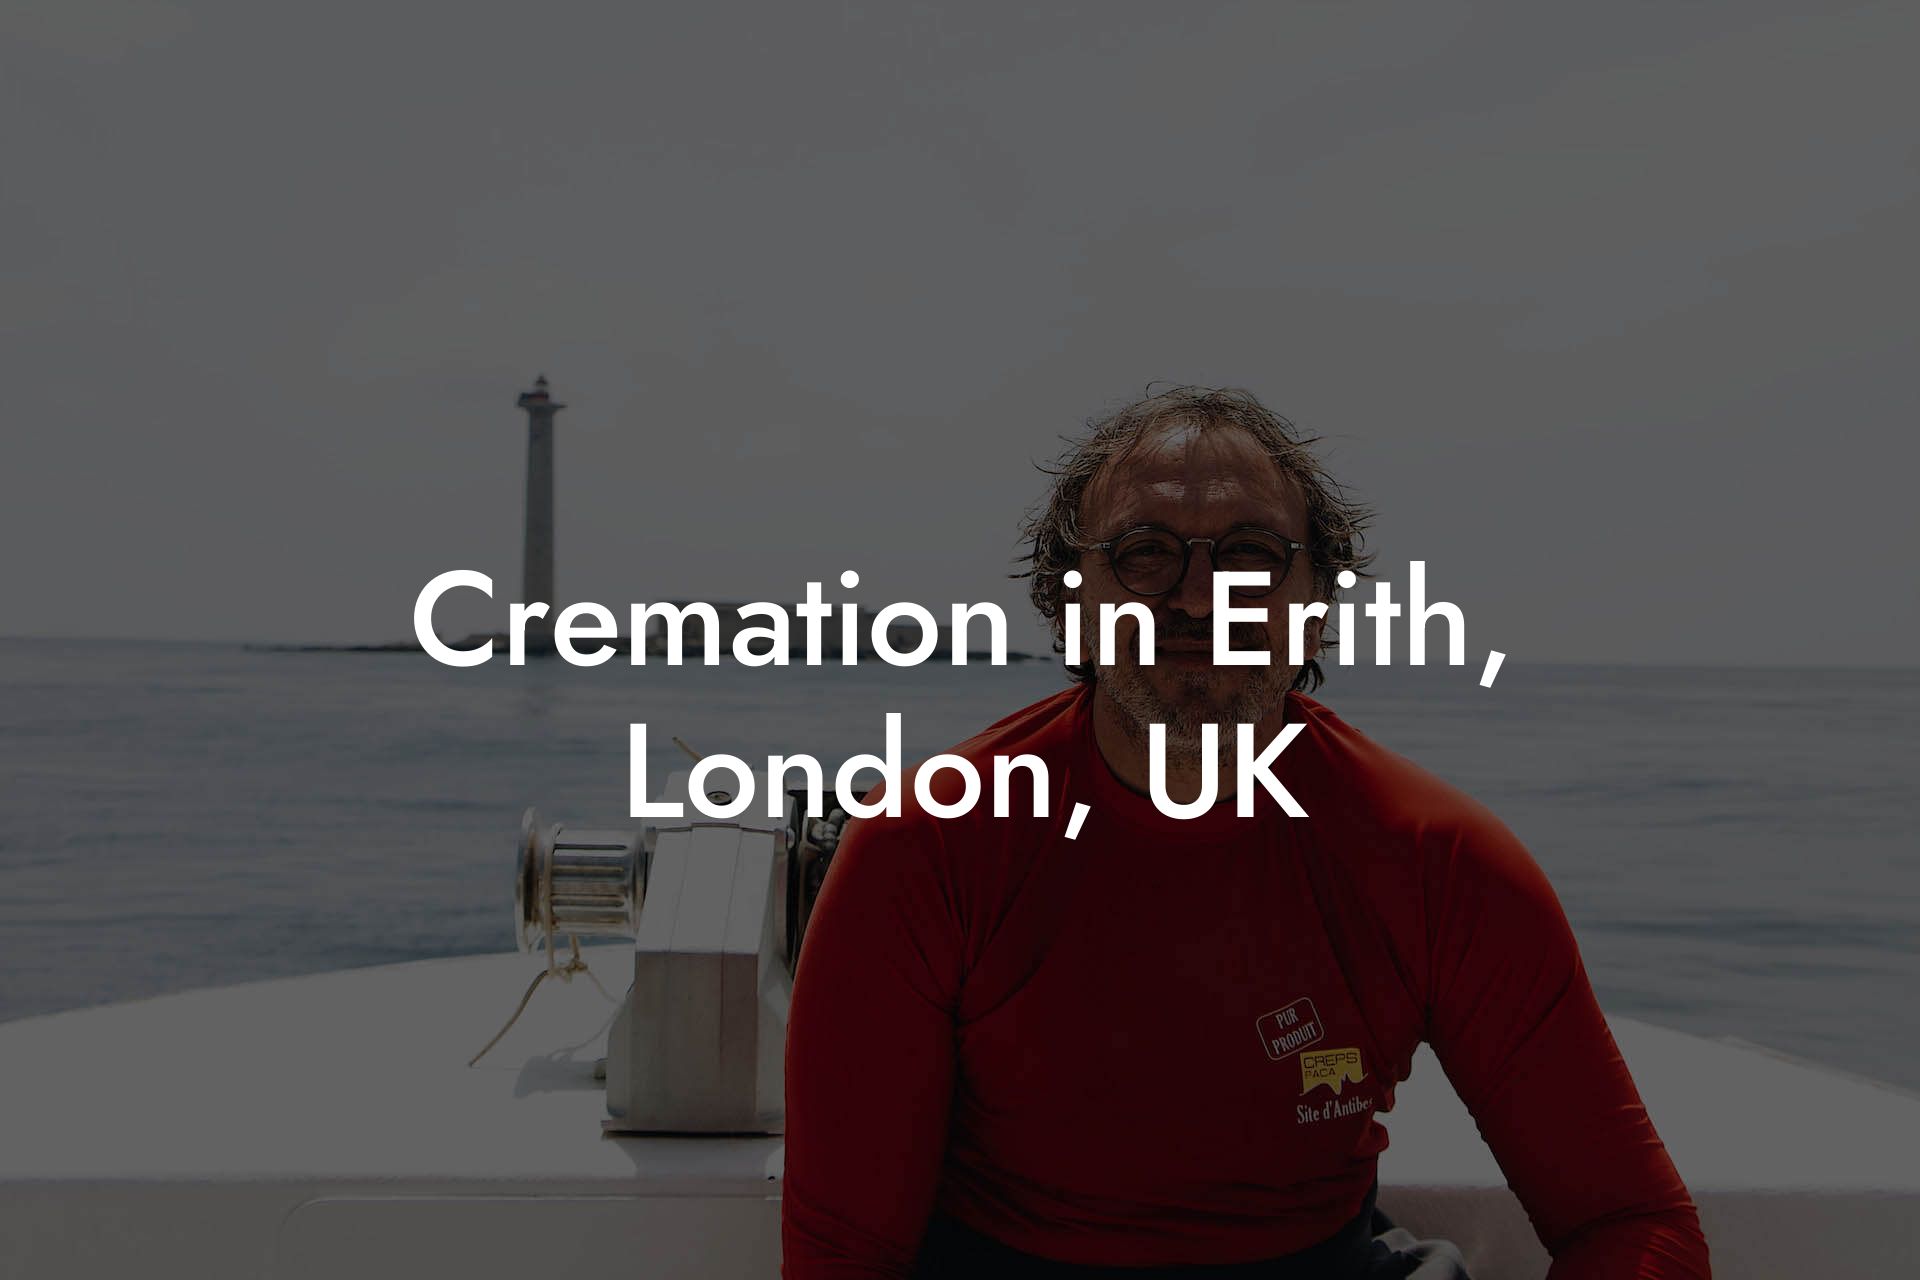 Cremation in Erith, London, UK